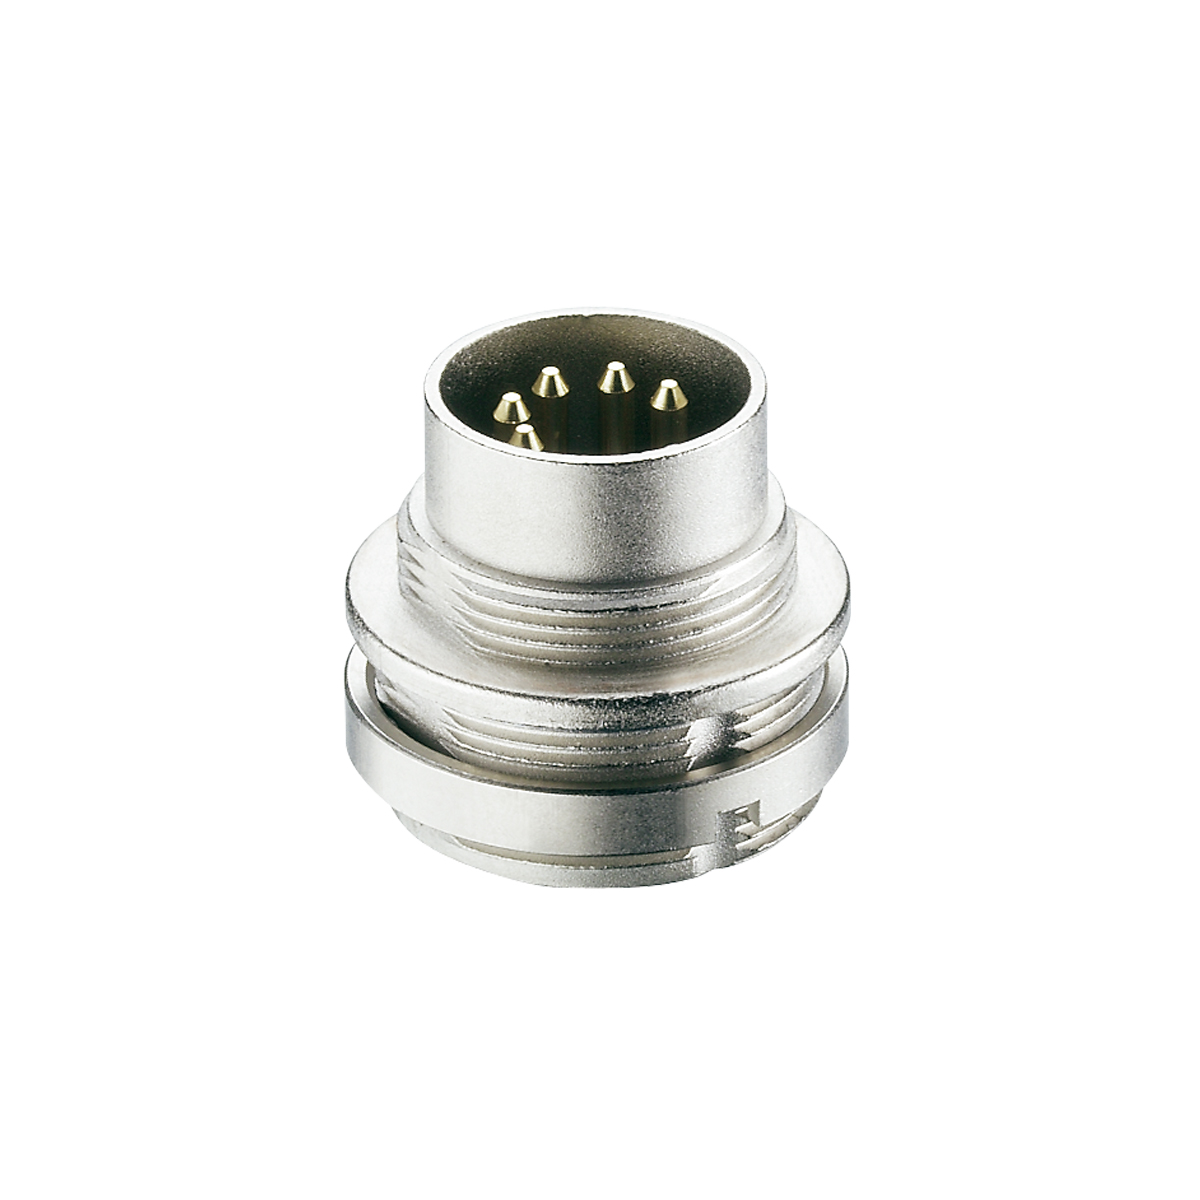 Lumberg: 314 (Series 03 | Circular connectors with threaded joint M16 acc. to IEC 61076-2-106, IP40/IP68)